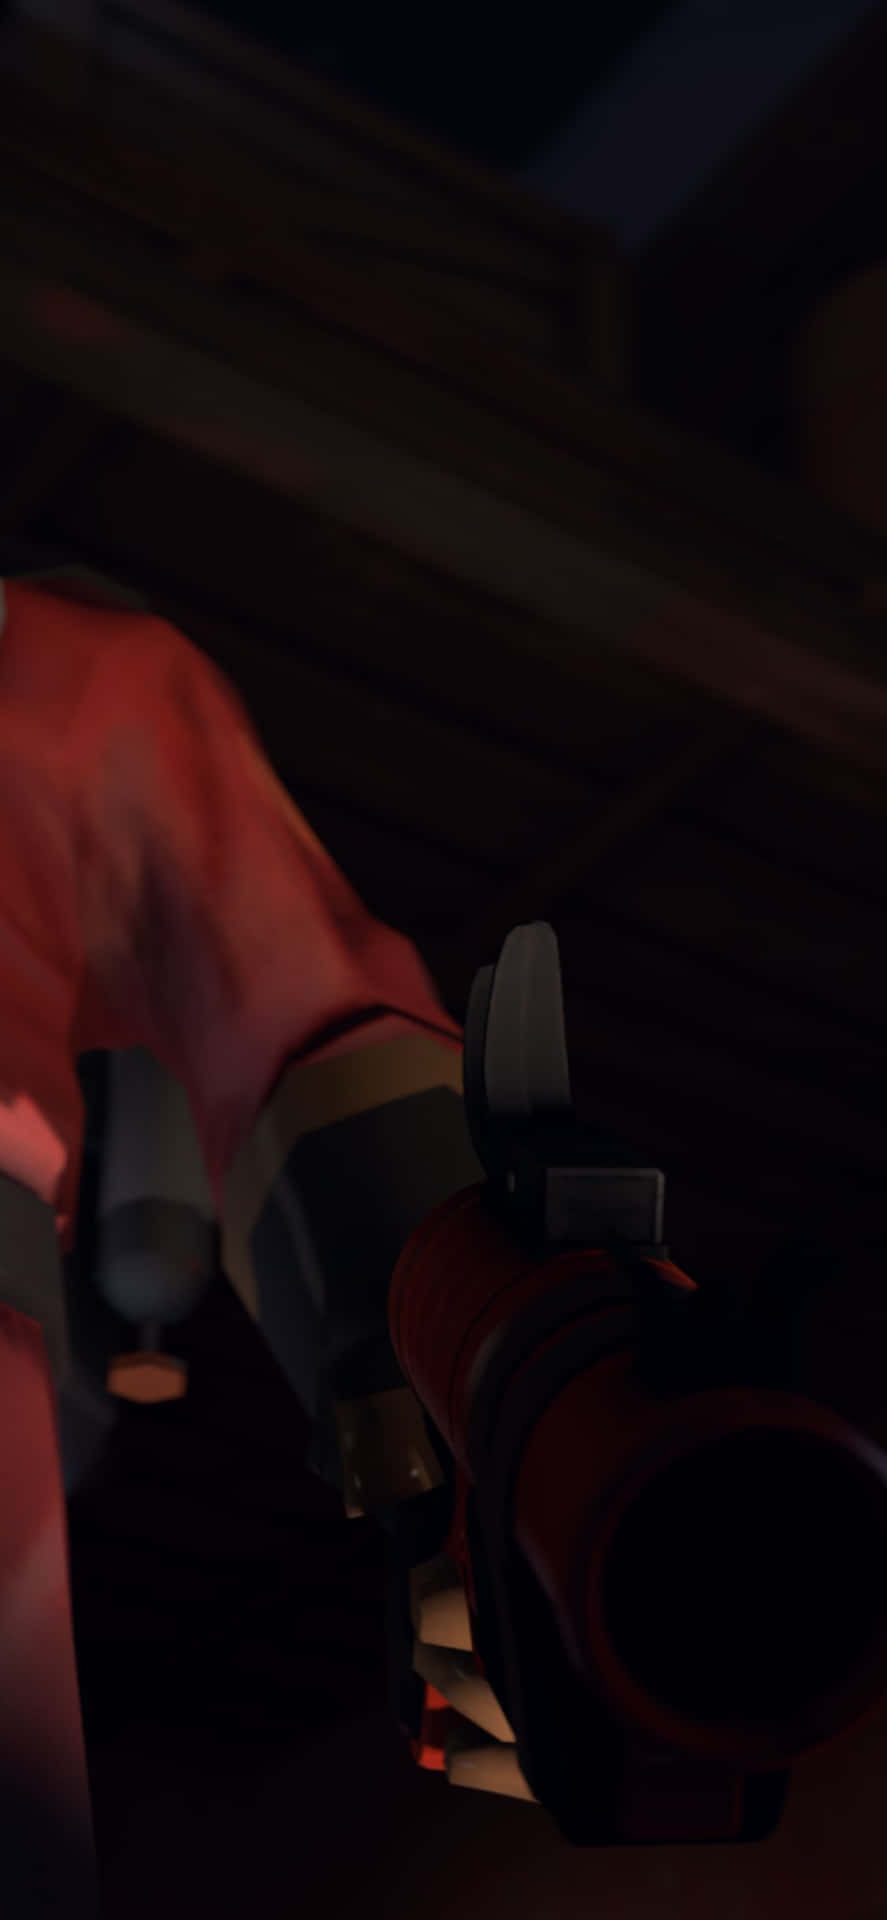 Nyd at spille Team Fortress 2 på din iPhone Xs tapet.